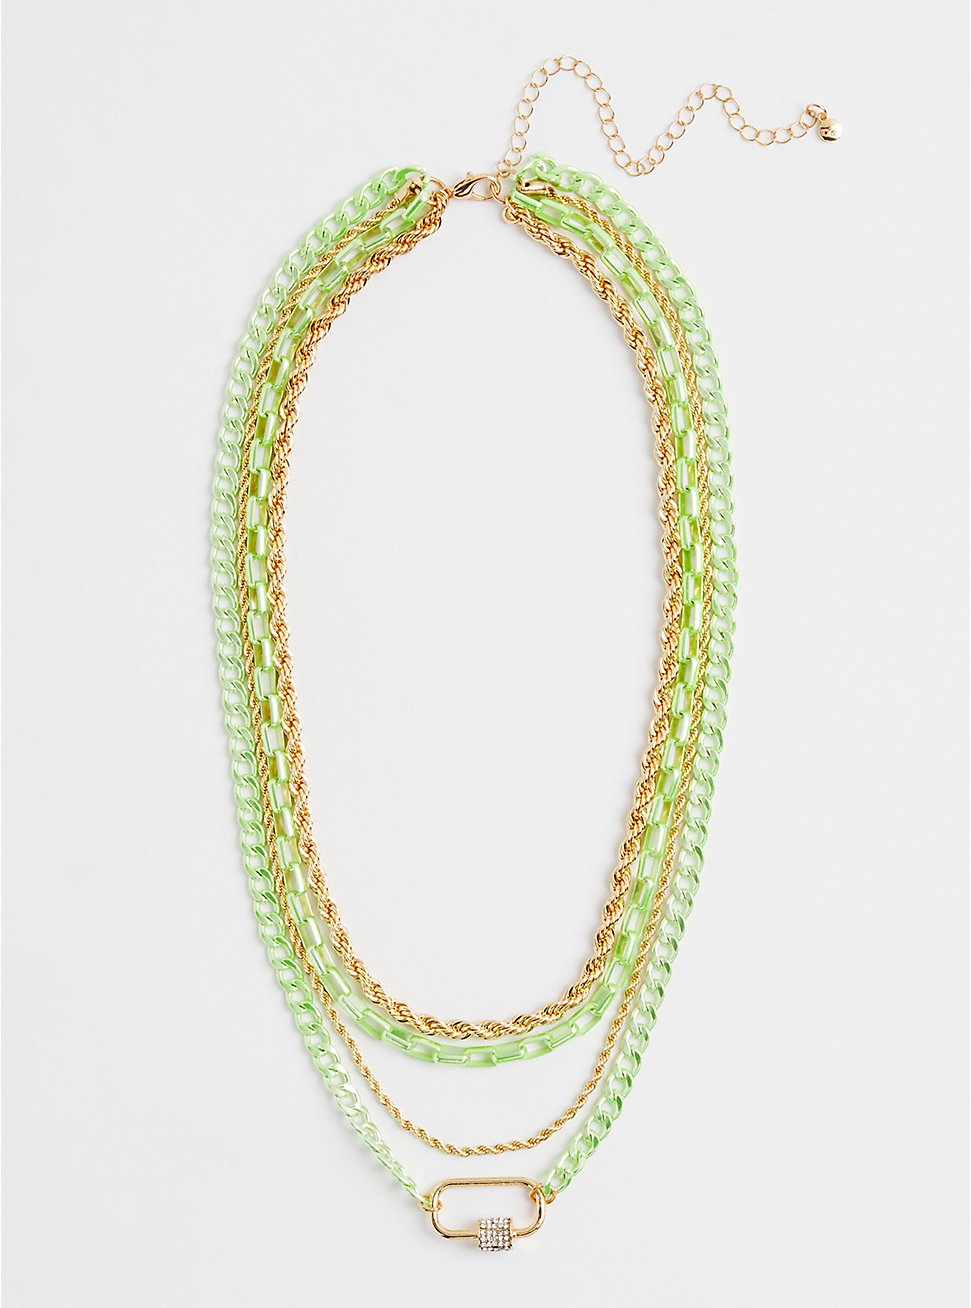 Plus Size Rope & Link Layered Chain Necklace - Green & Yellow, , hi-res